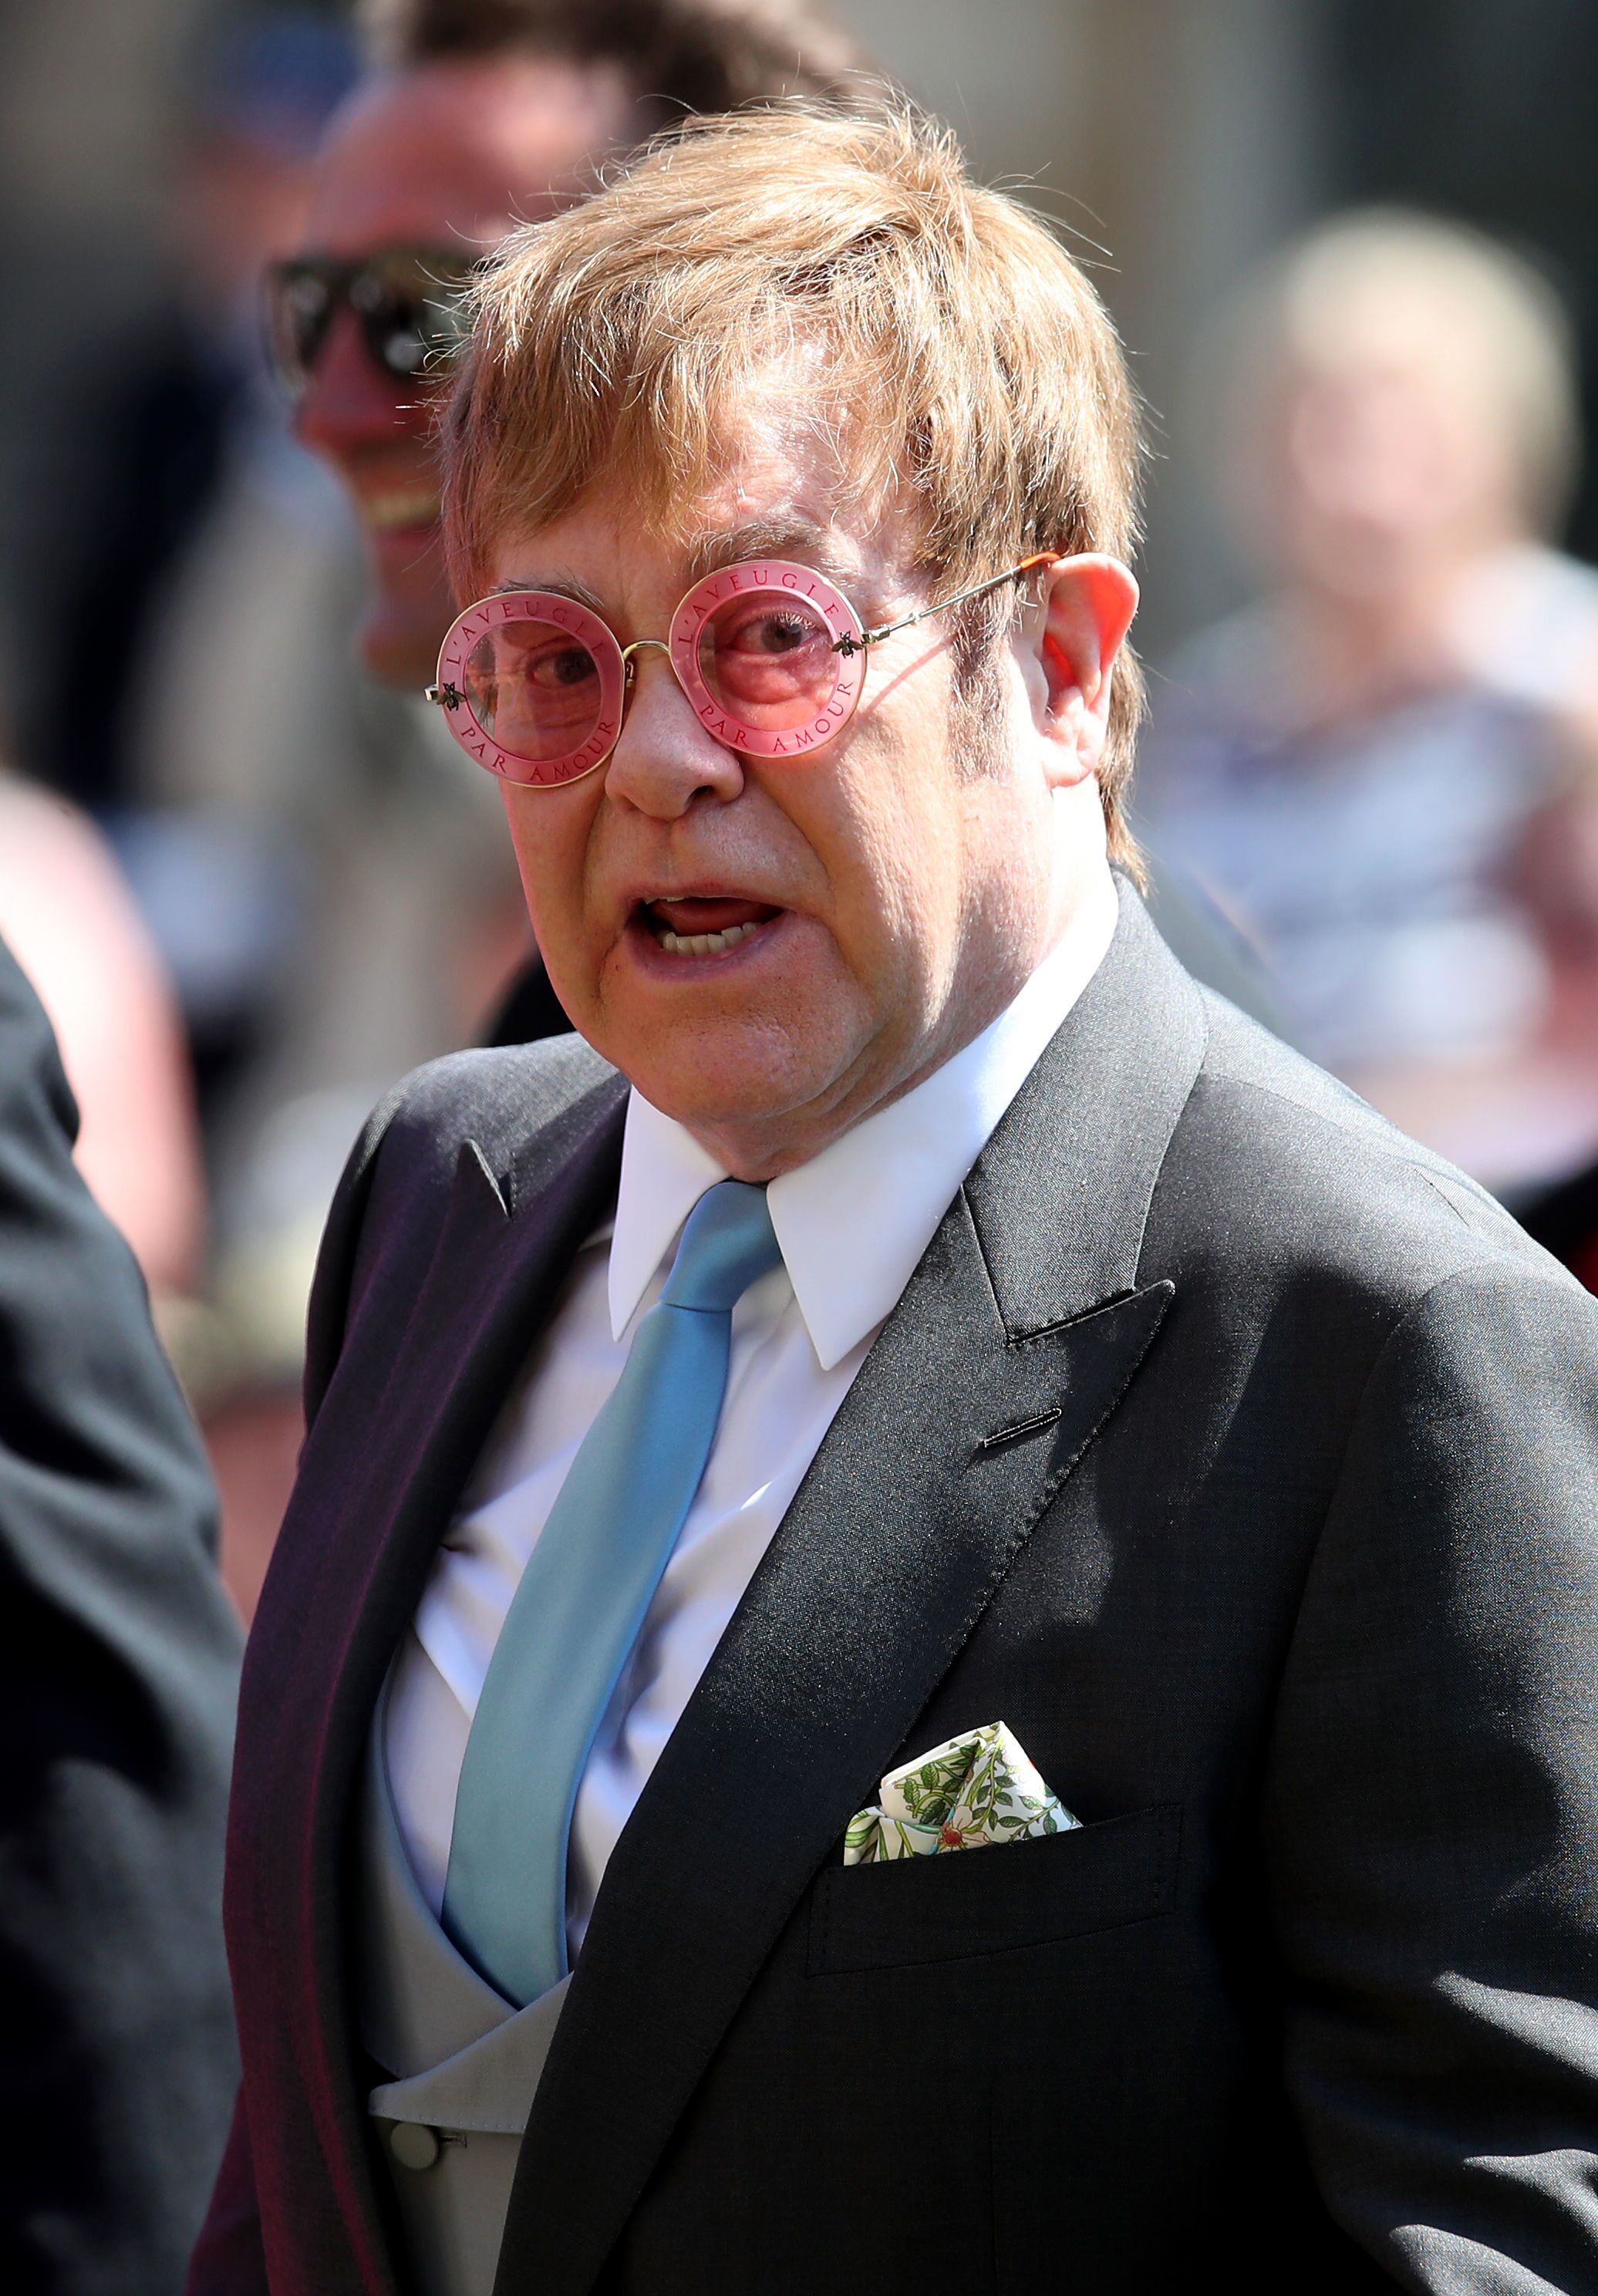 Elton John leaves St George's Chapel at Windsor Castle after the wedding of Prince Harry to Meghan Markle. | Source: Getty Images